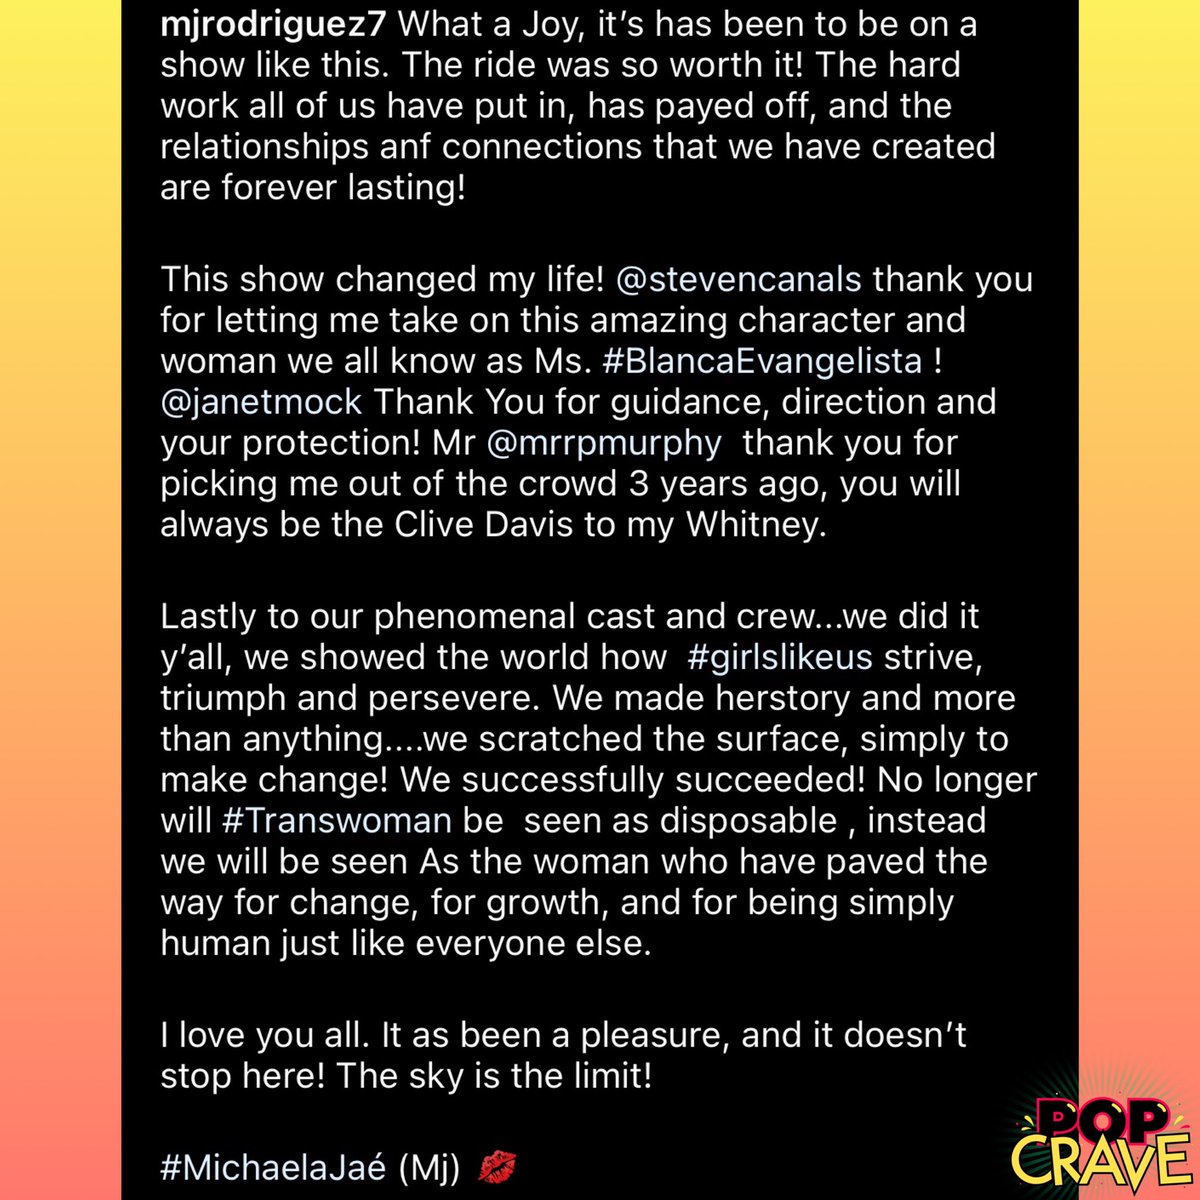 .@MjRodriguez7 responds to the announcement that ‘Pose’ will end with season 3 in new Instagram post: “We made herstory and more than anything... we scratched the surface, simply to make change! We successfully succeeded! No longer will trans women be seen as disposable...”